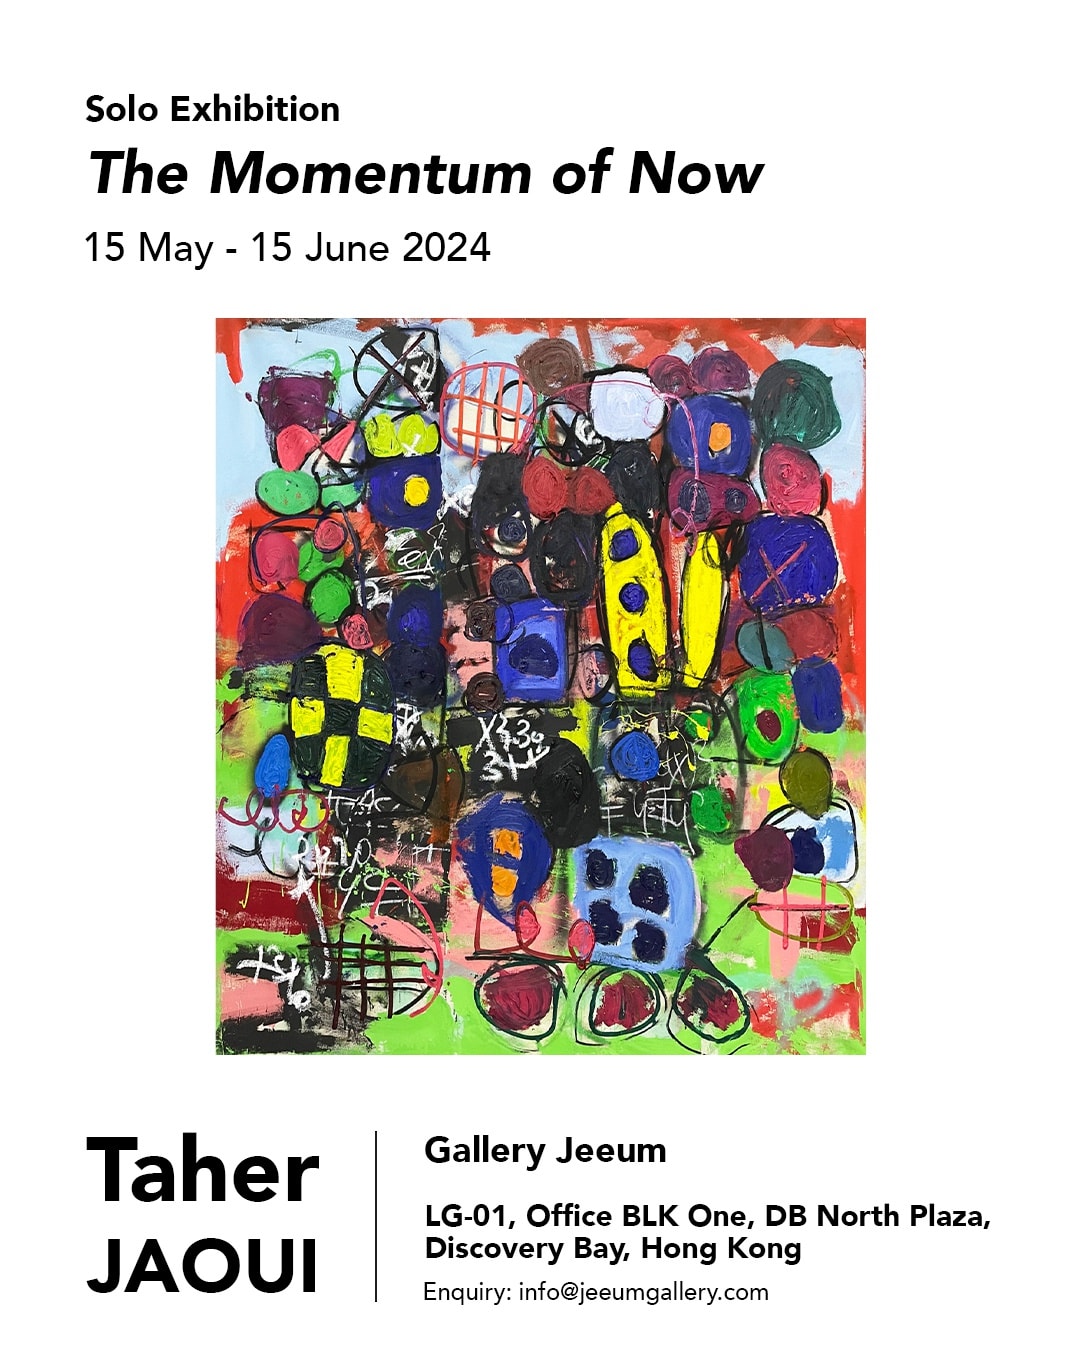 The Momentum of NOW